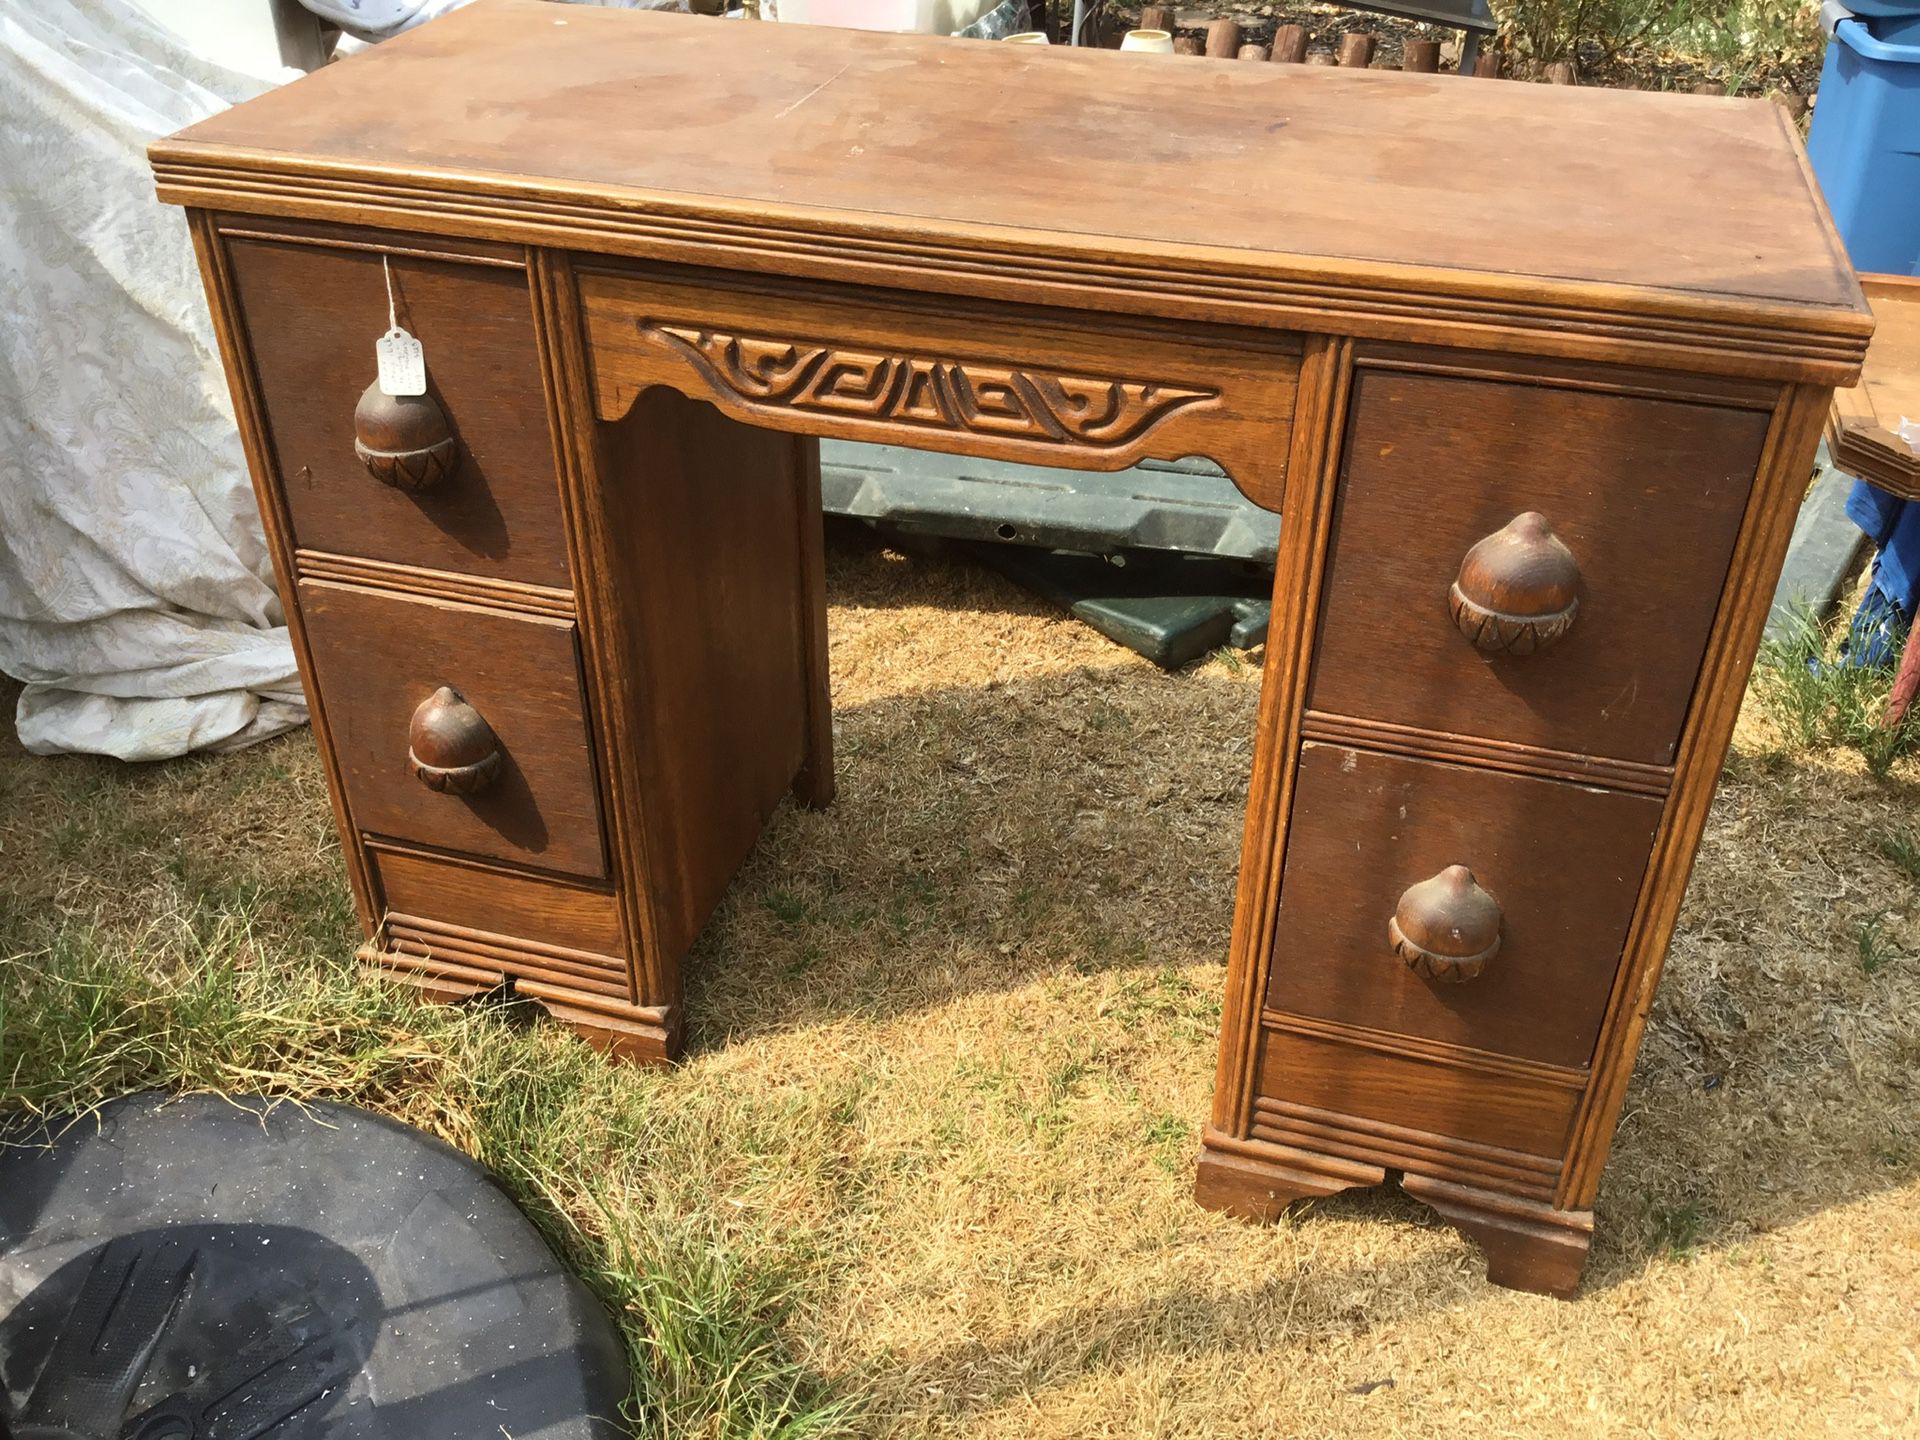 Antique desk with acorn handles measurement 3‘4“ wide 1‘5“ in depth and 2’6” in height